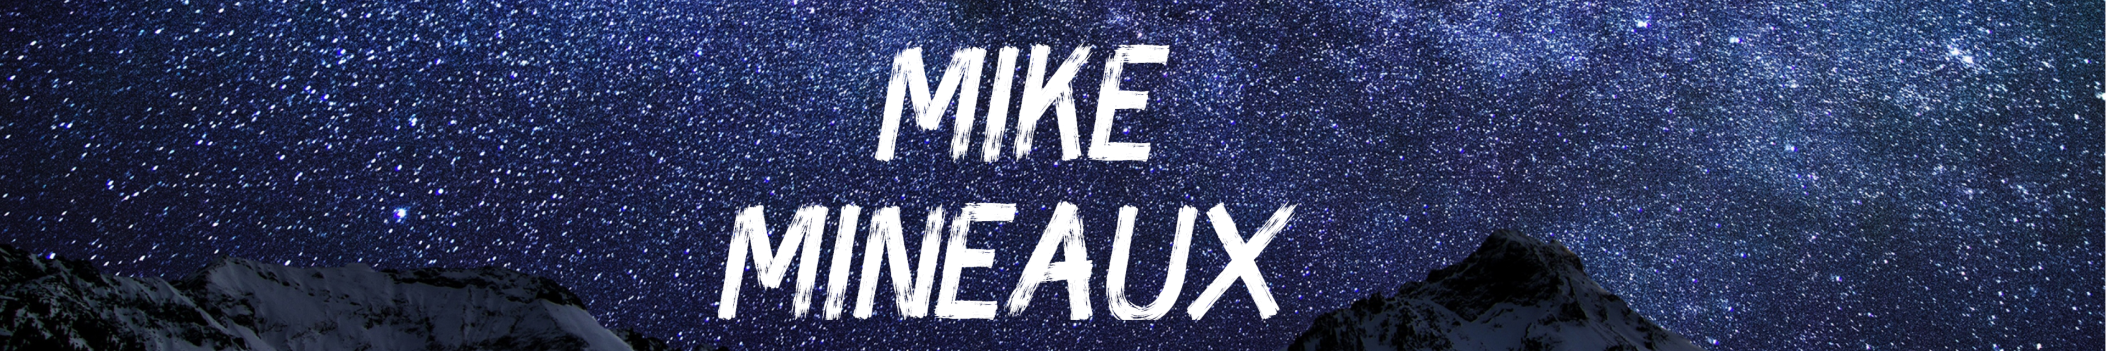 MIKE MINEAUX